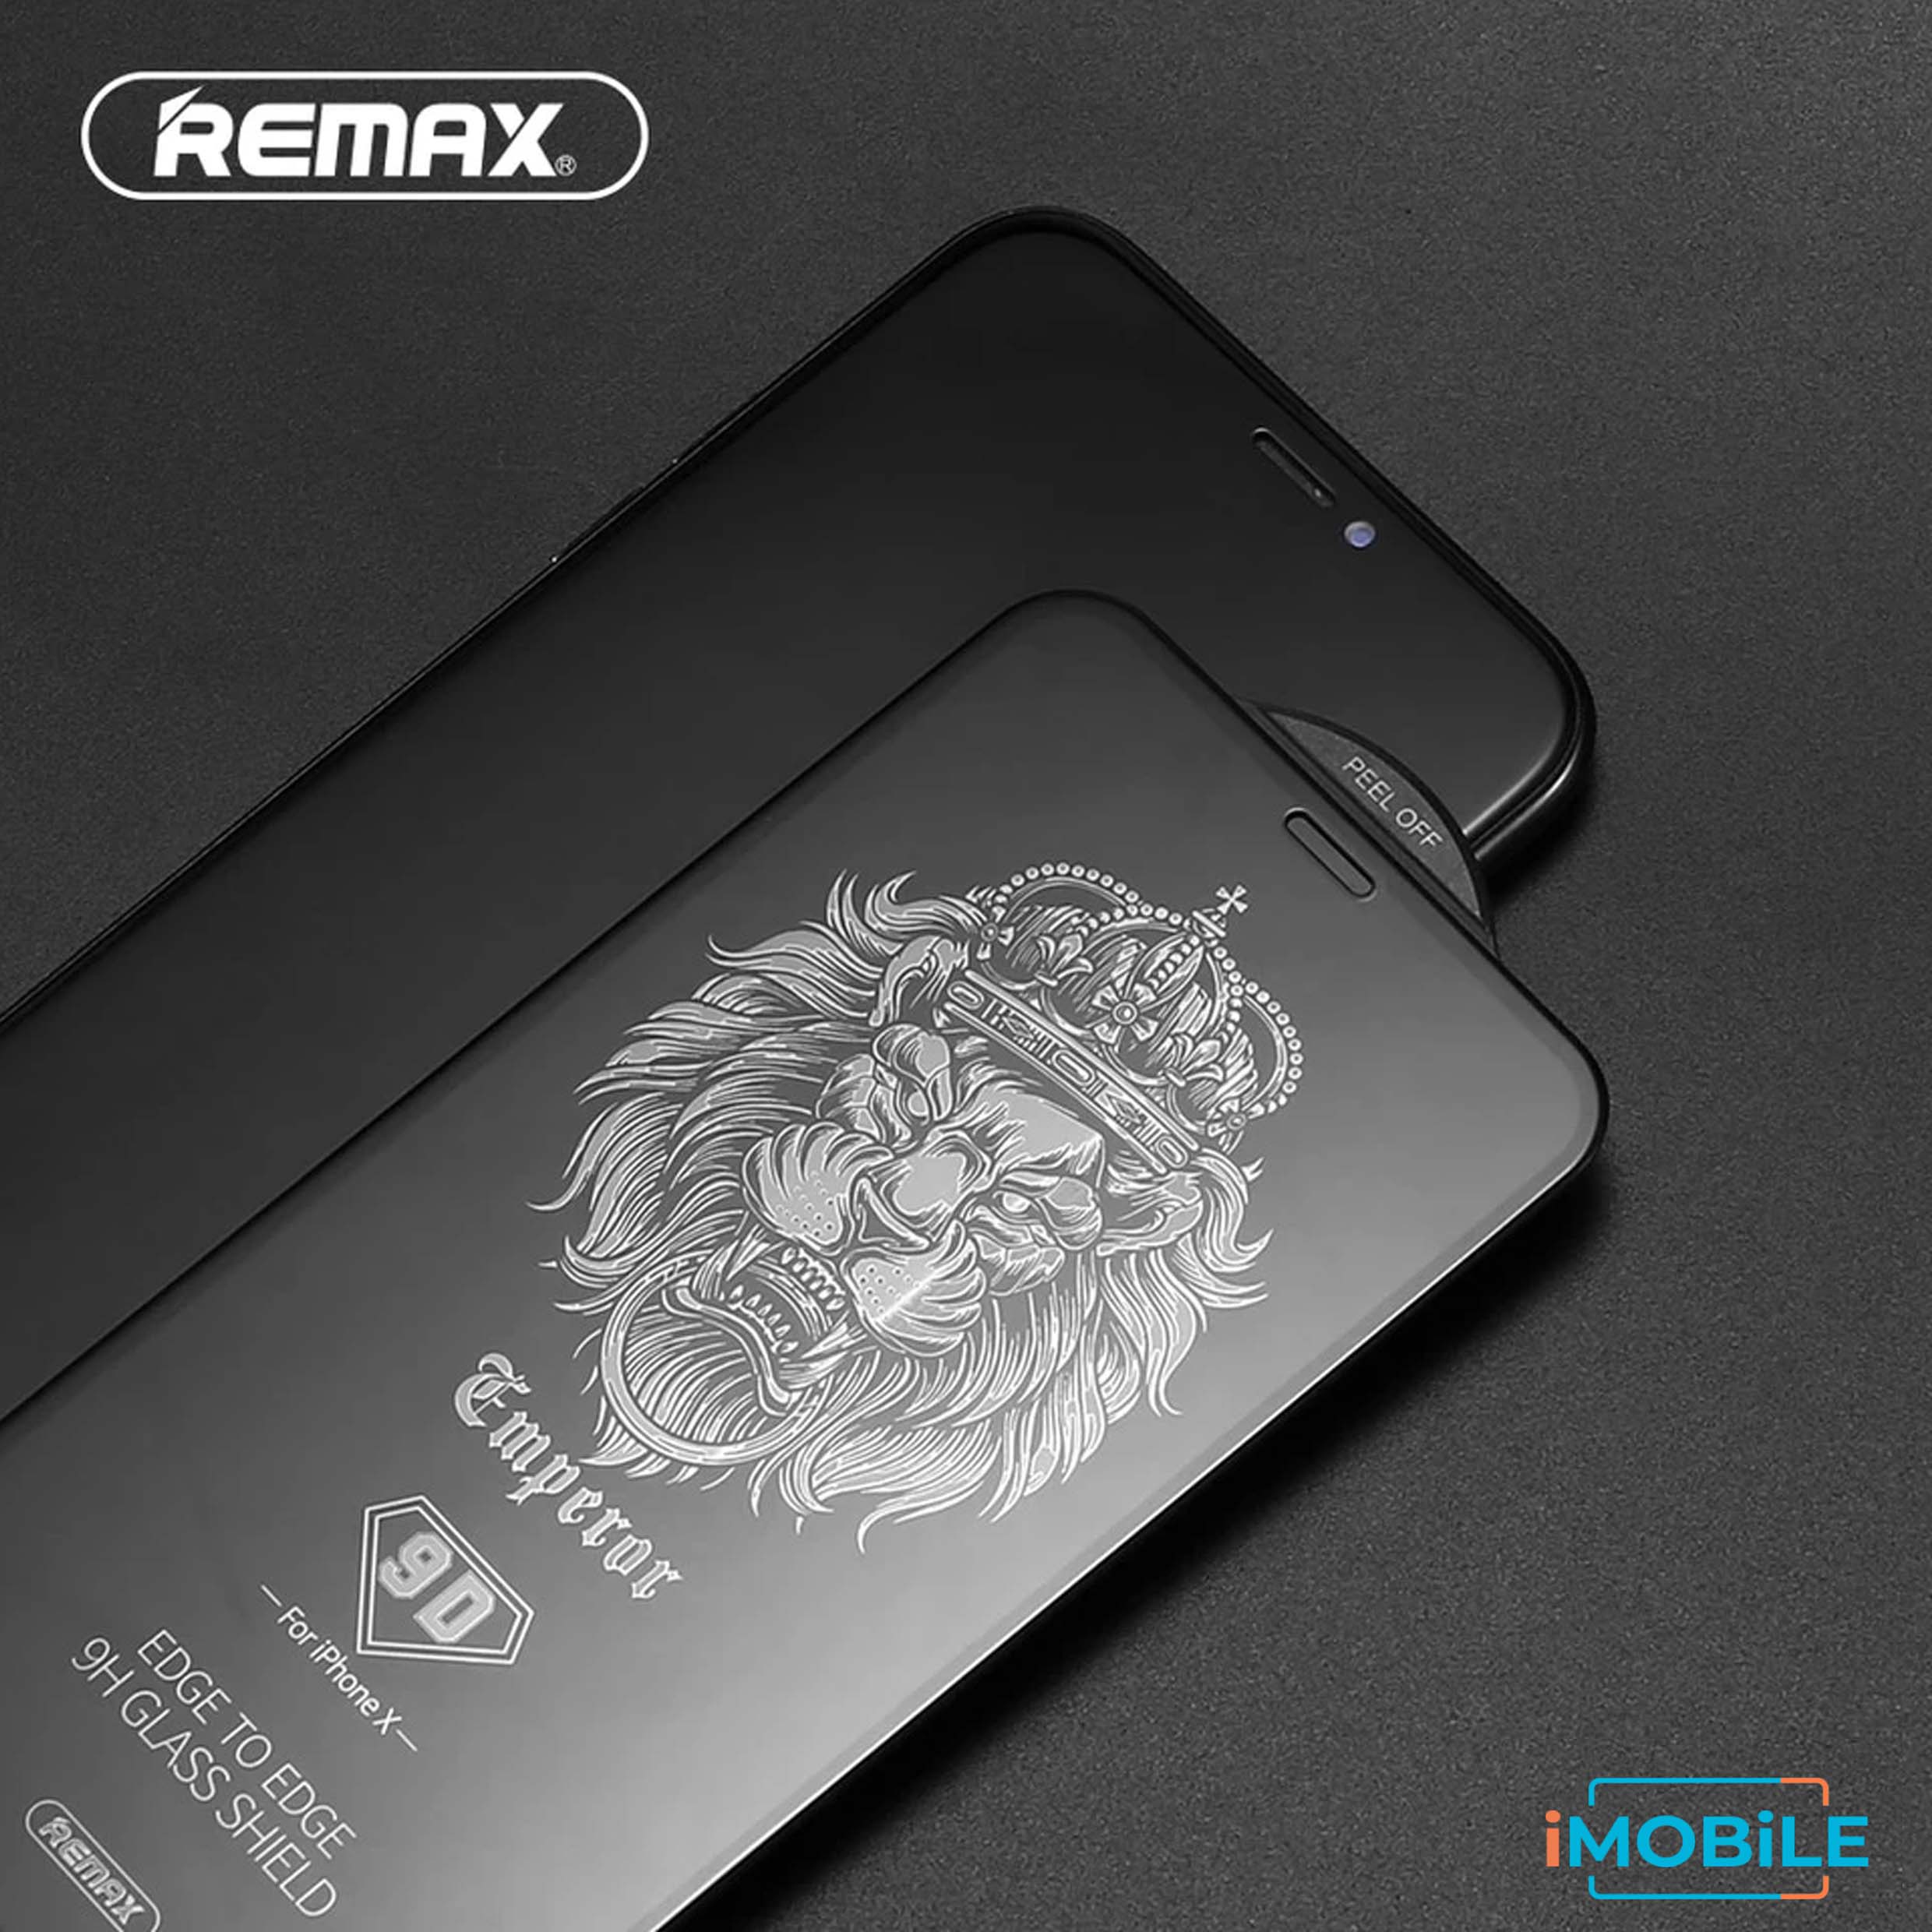 Remax 2.5D Tempered Glass with Envelope Pack, iPhone 12 Pro Max